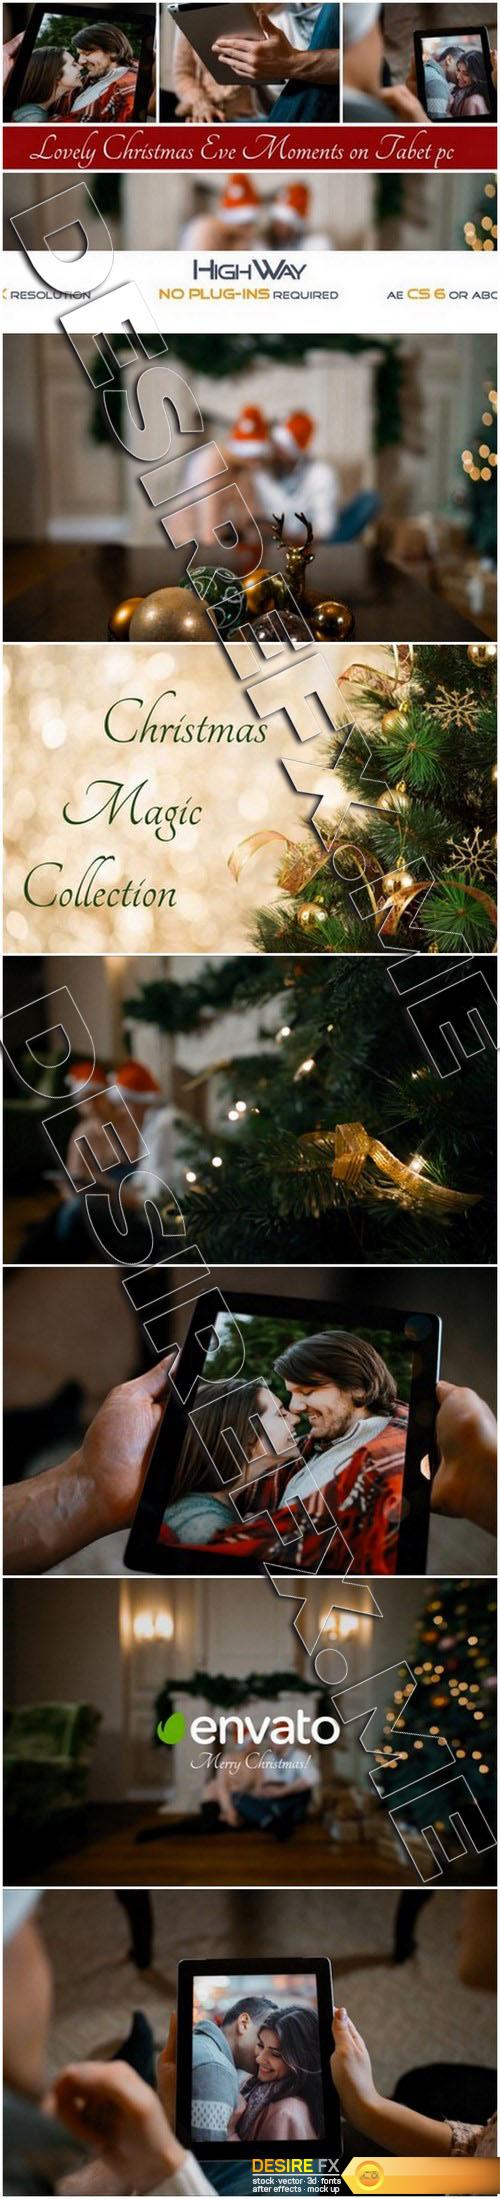 Videohive 20936057 Lovely Christmas Eve Moments on Tablet PC